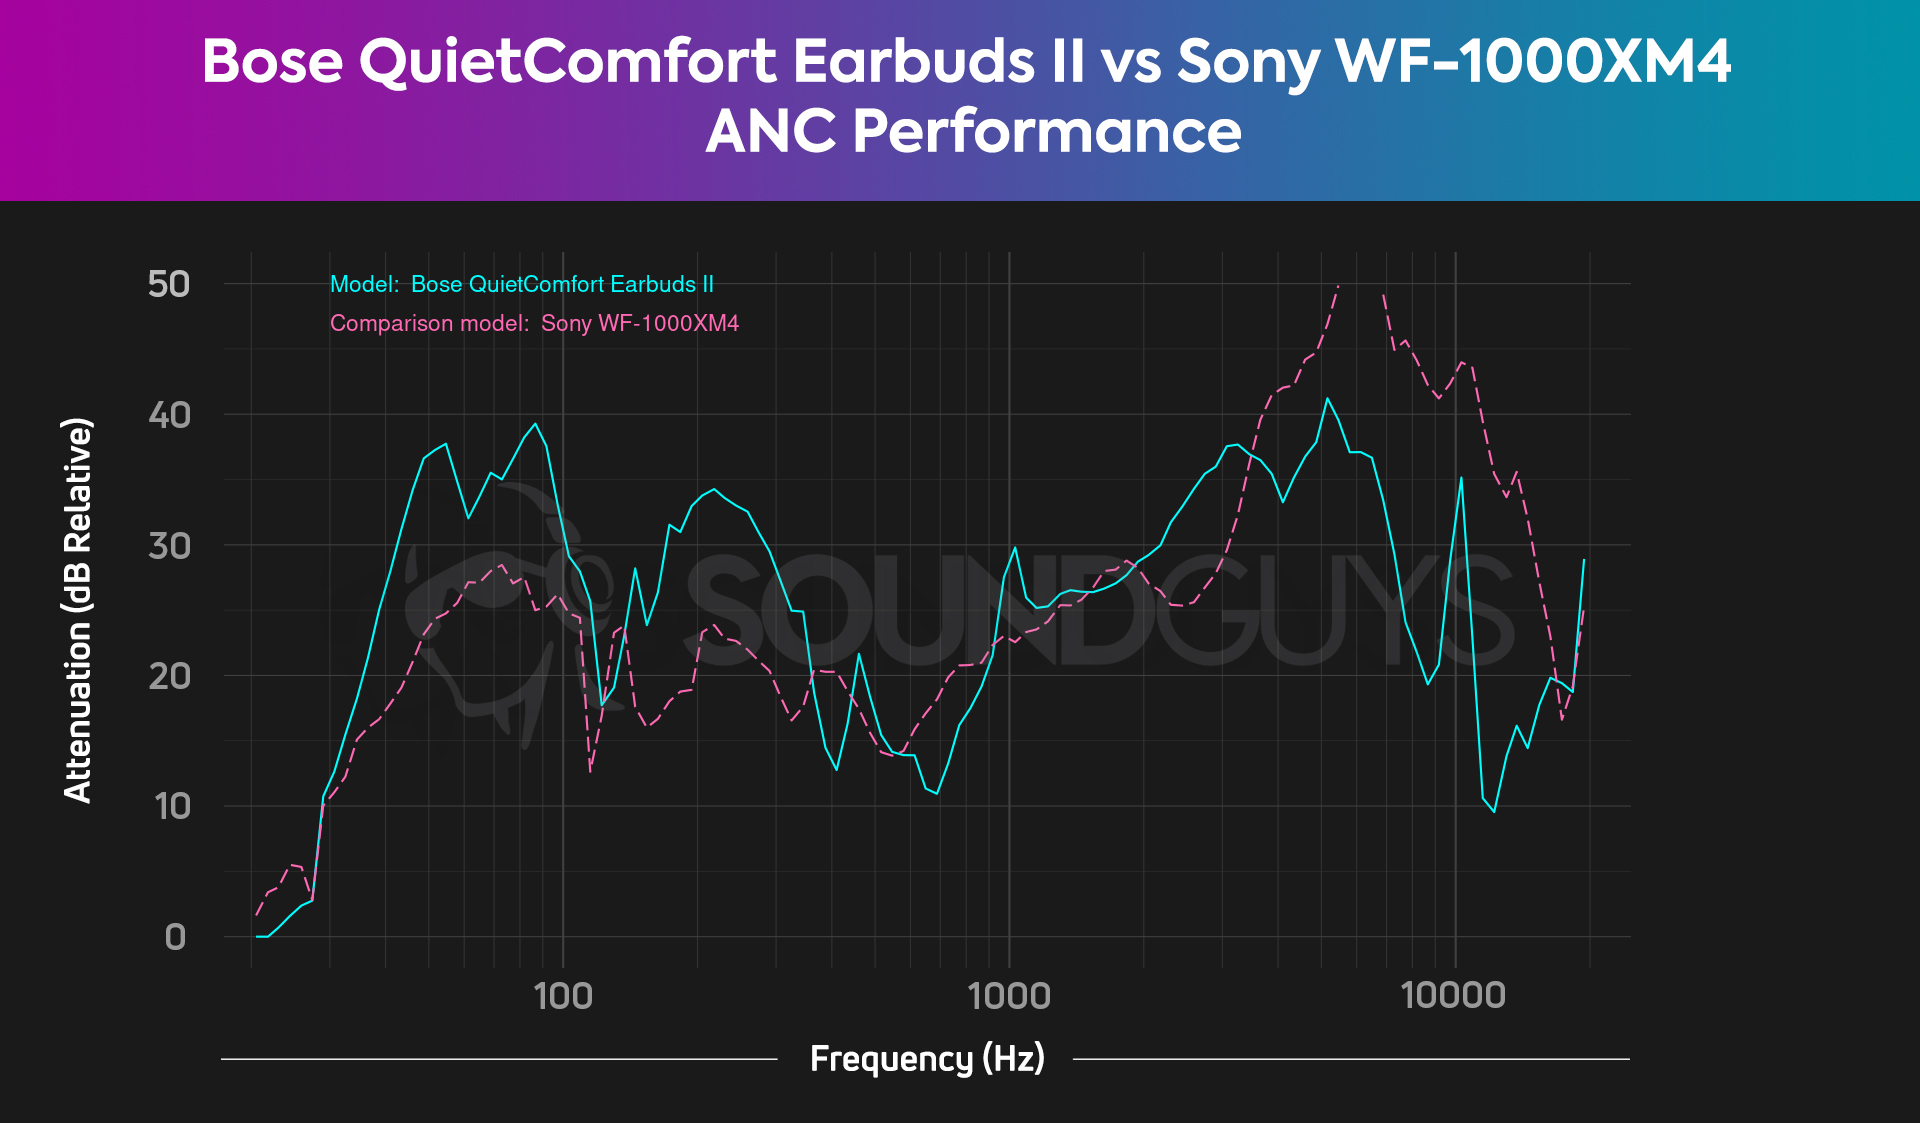 A chart comparing the ANC performance of the Bose QuietComfort Earbuds II and the Sony WF-1000XM